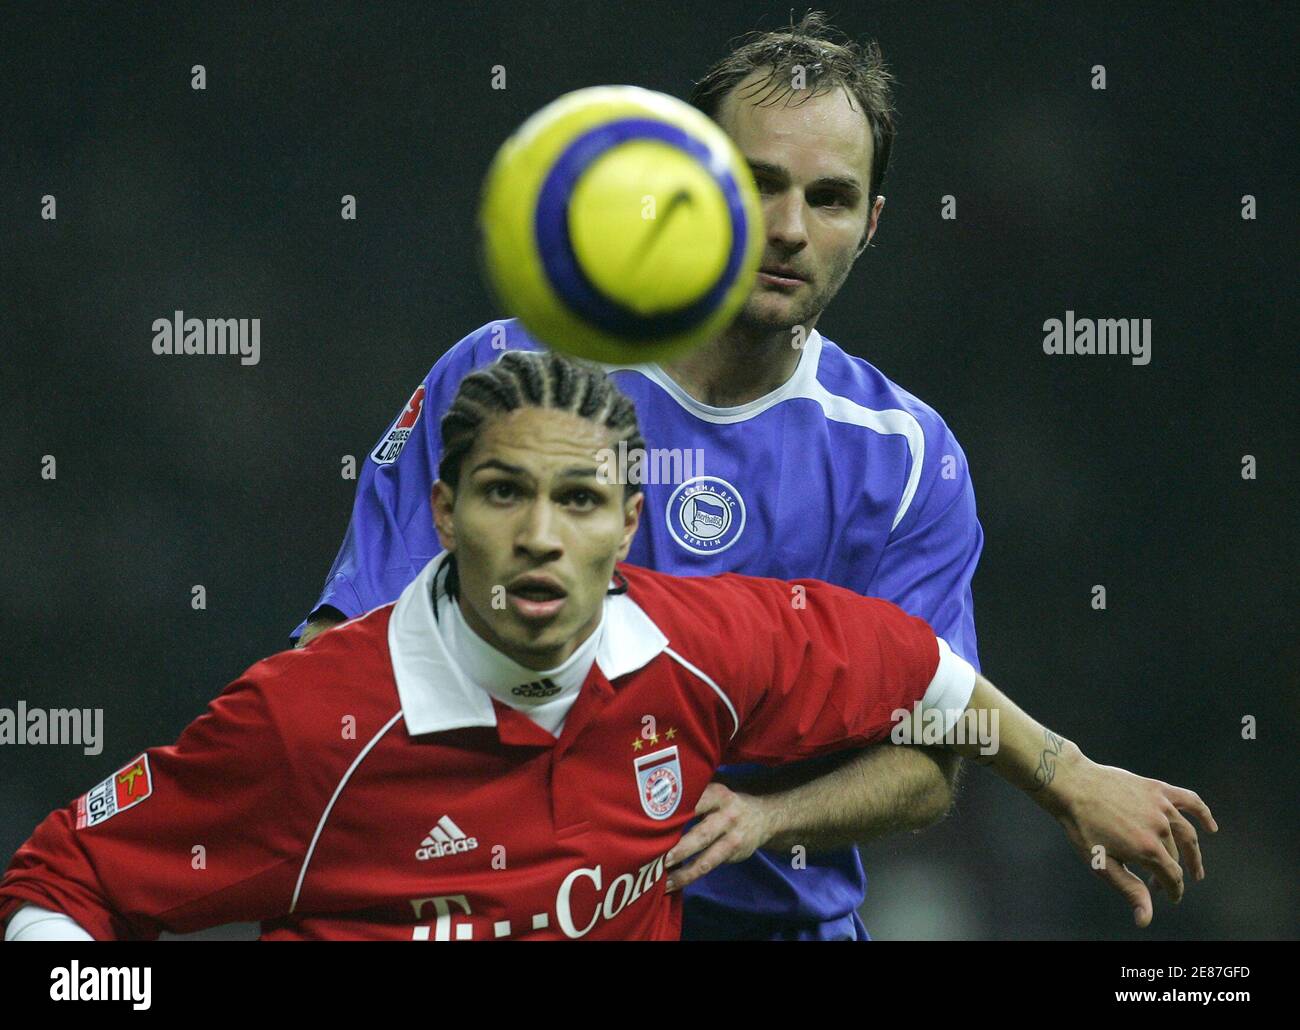 FC Bayern Munich's Jose Paolo Guerrero (front) and Hertha Berlin's Dick van  Burik fight for the ball during their German first division Bundesliga  soccer match in Berlin February 7, 2006. The match